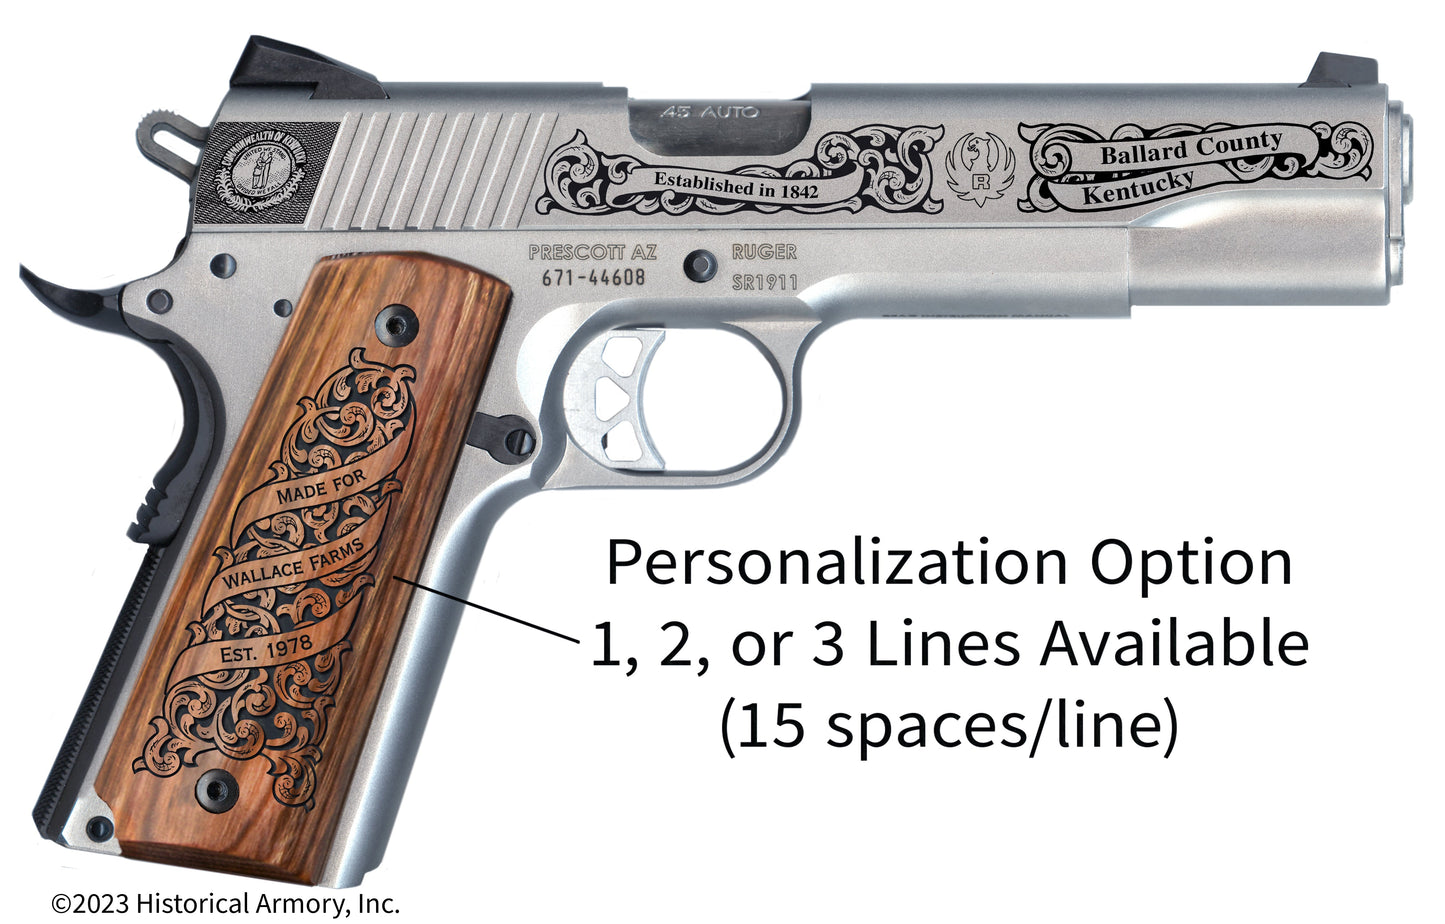 Ballard County Kentucky Personalized Engraved .45 Auto Ruger 1911